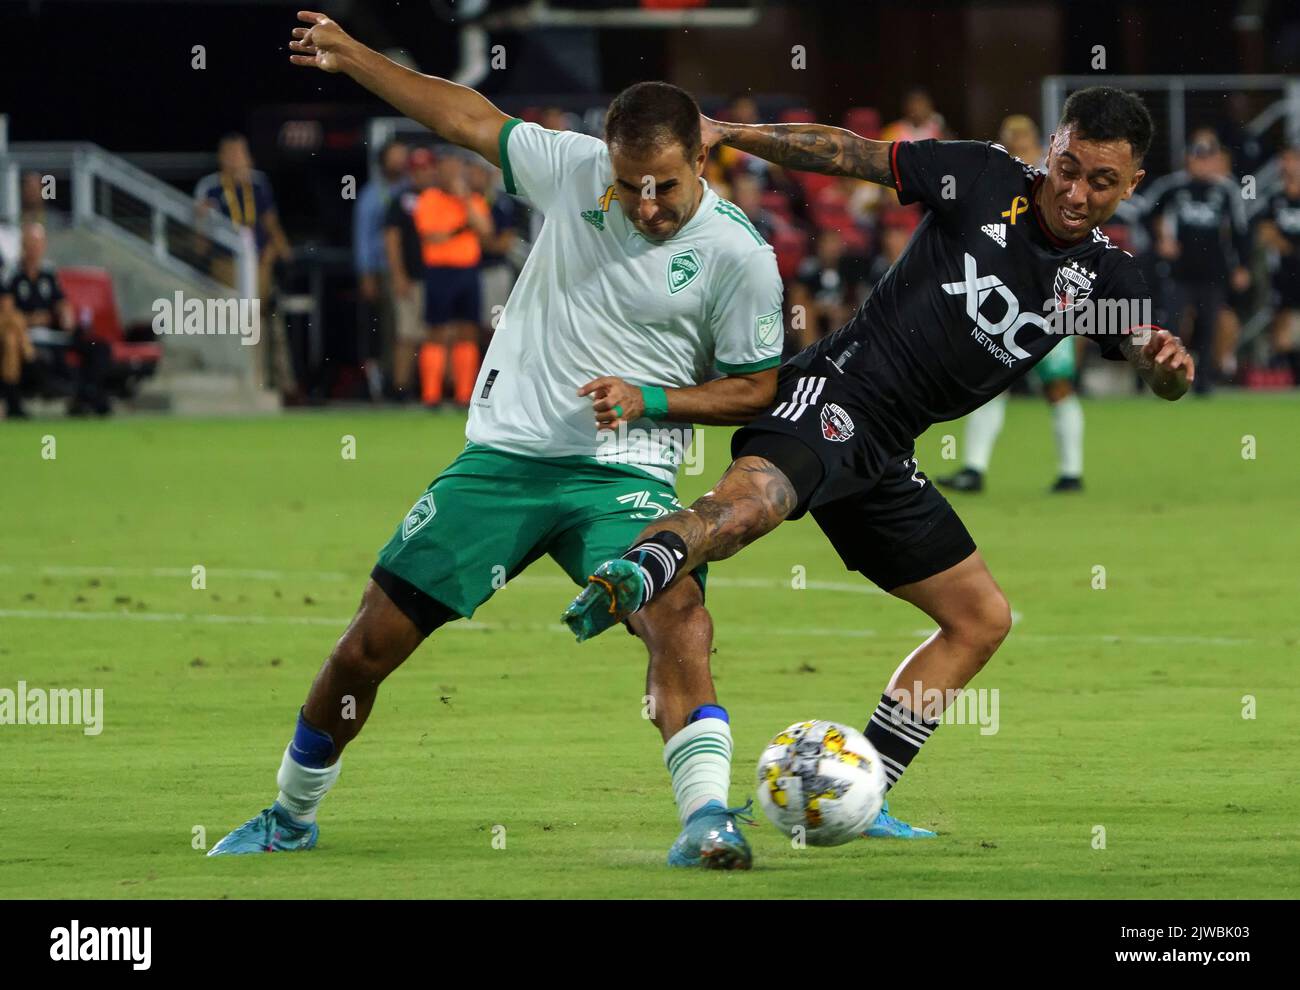 WASHINGTON, DC, USA - 4 SEPTEMBER 2022: D.C. United forward Martin Rodriguez (77) and Colorado Rapids defender Steven Beitashour (33) battle for the ball during a MLS match between D.C United and the Colorado Rapids, on September 04, 2022, at Audi Field, in Washington, DC. (Photo by Tony Quinn-Alamy Live News) Stock Photo